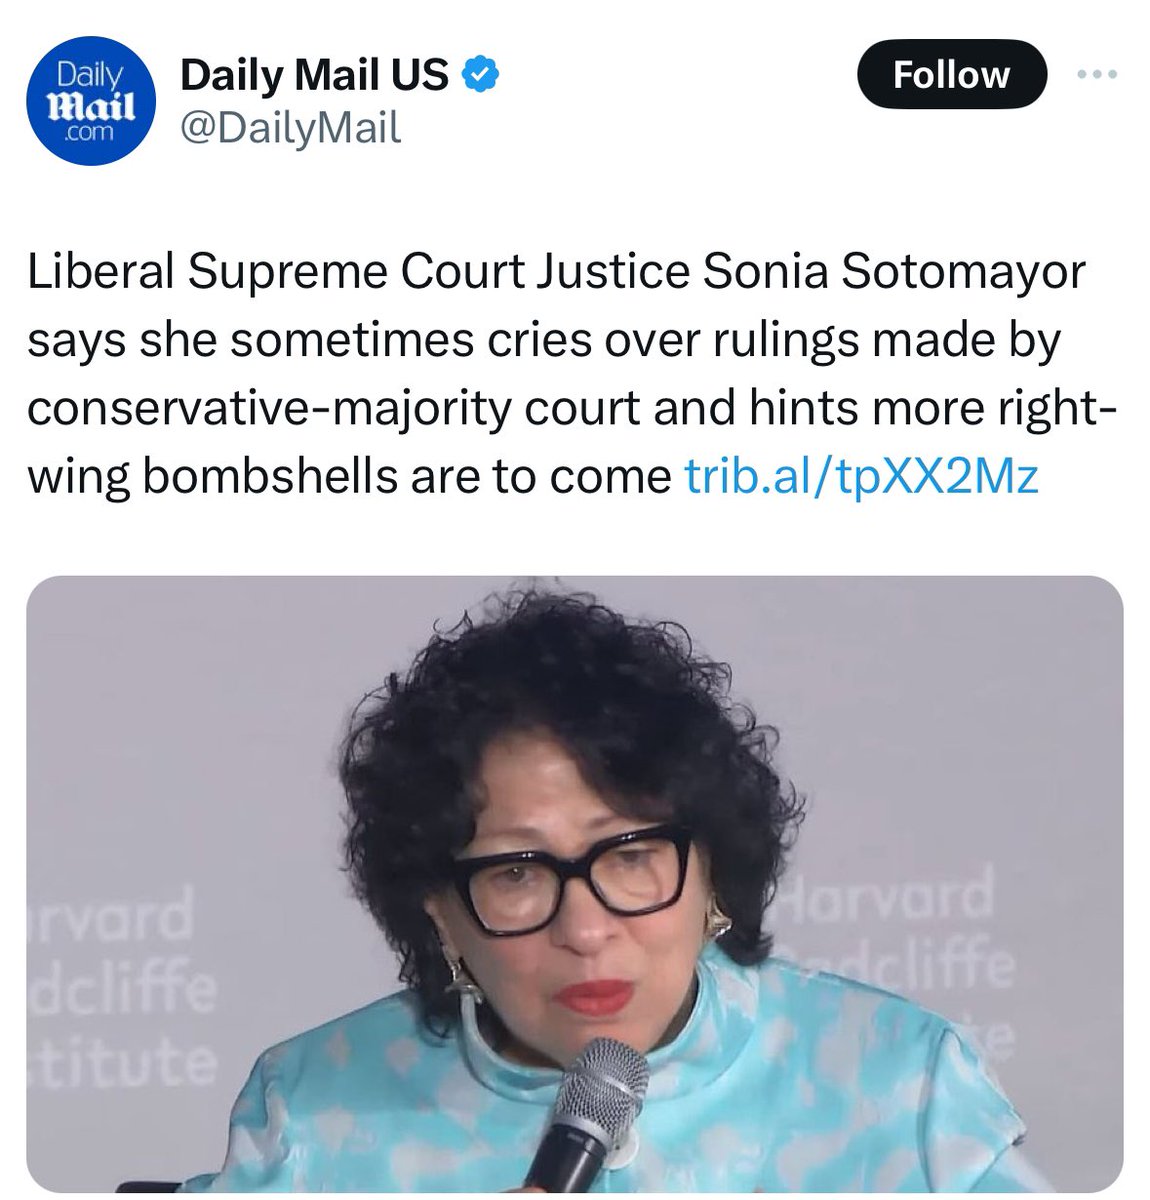 President Trump fundamentally changed the Supreme Court by appointing 3 constitutionalist conservative justices. Now Sonia Sotomayor cries at the end of every term. That’s a great legacy.